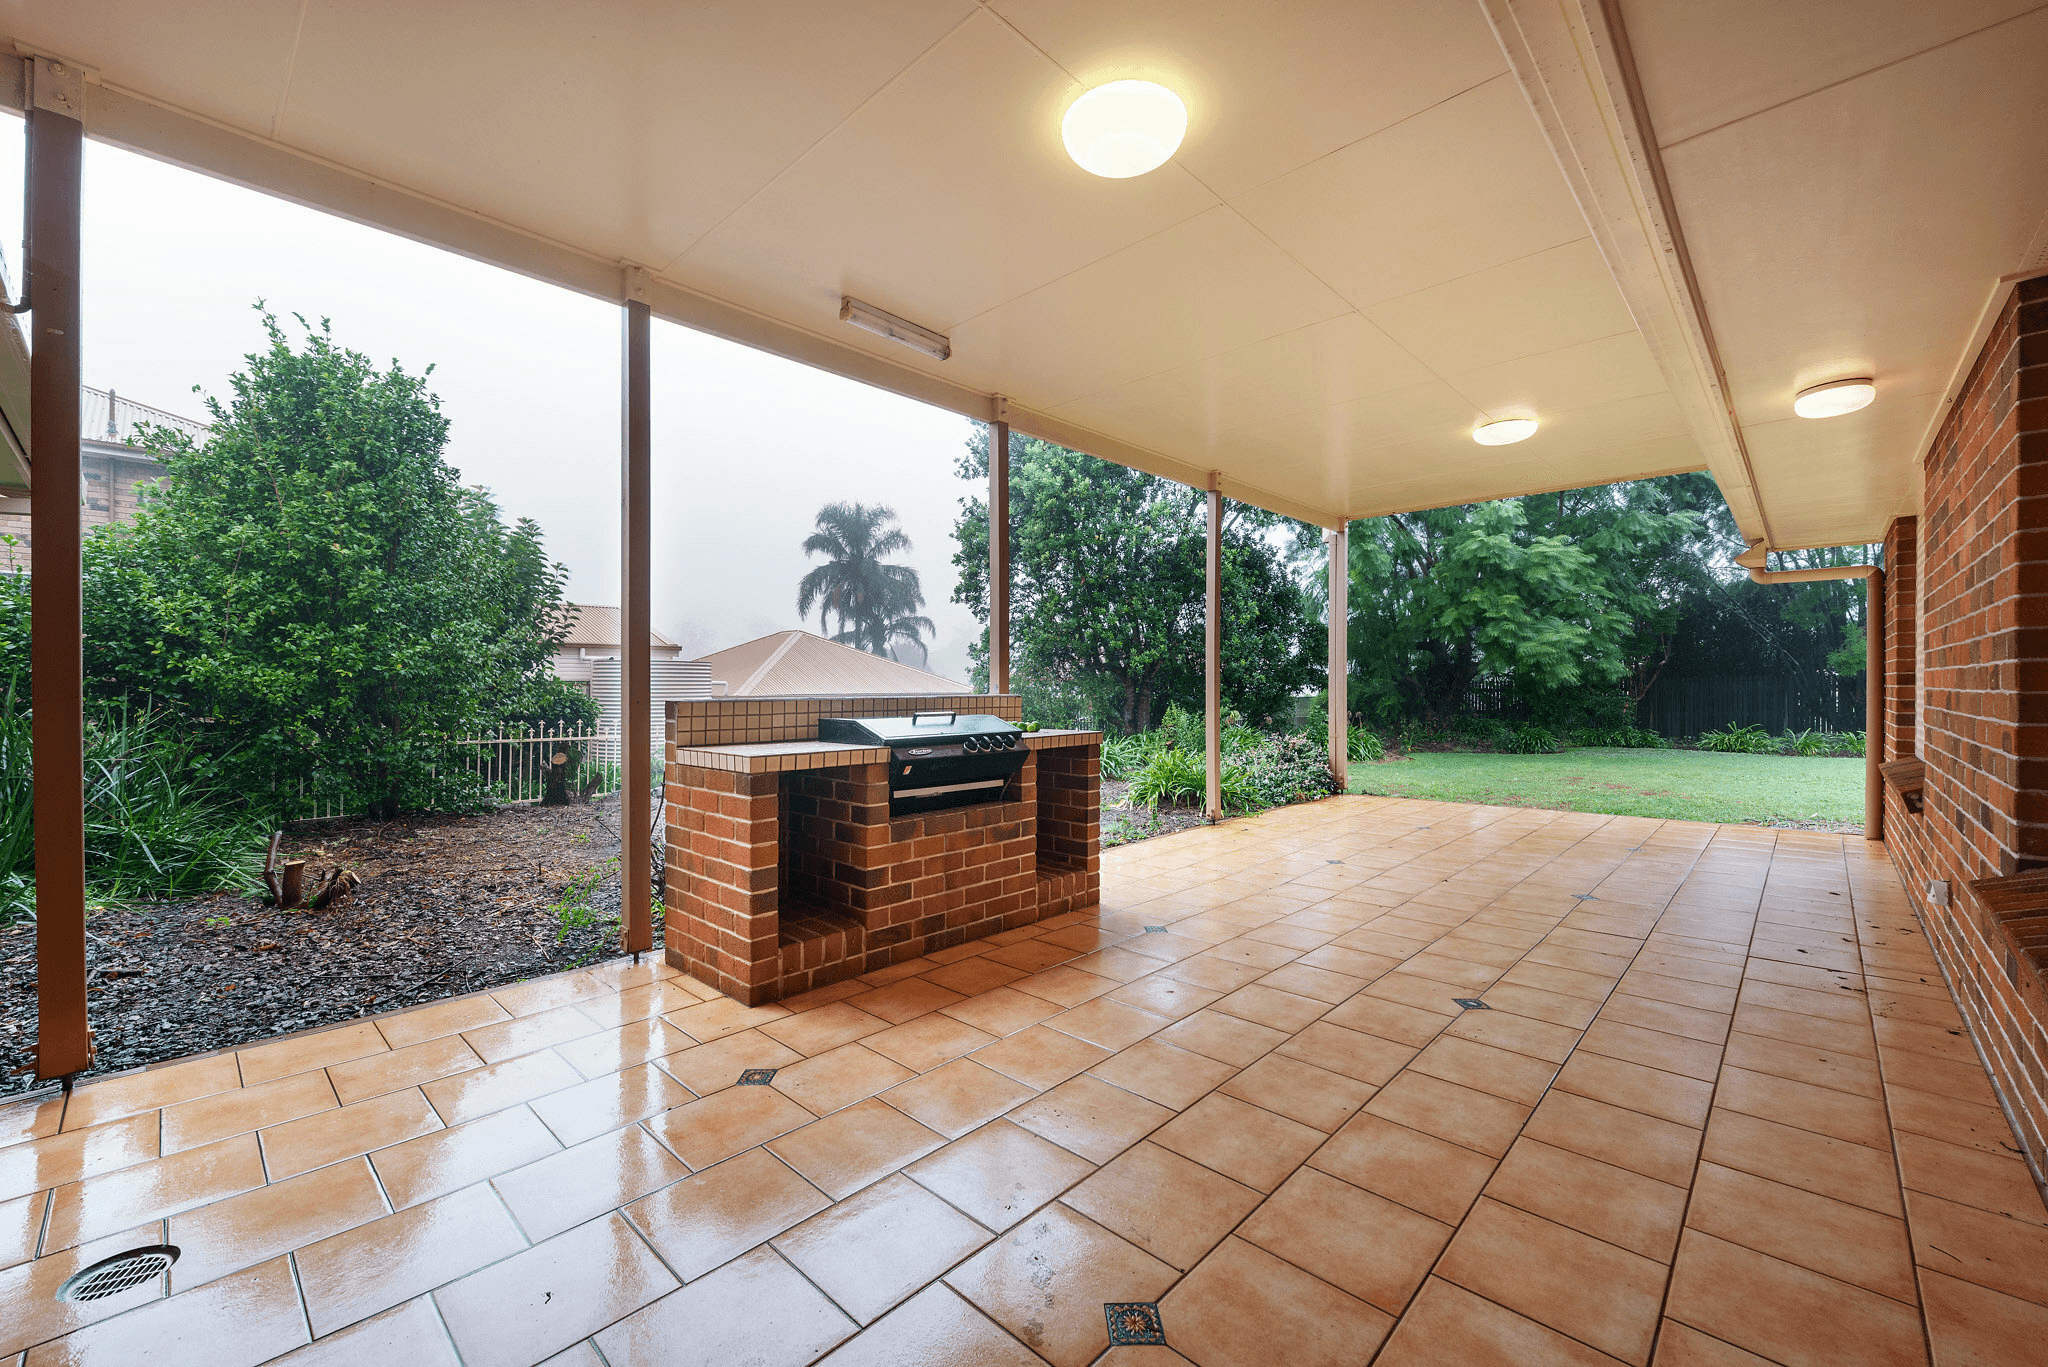 3 Wiangaree Dr, Rangeville, QLD 4350